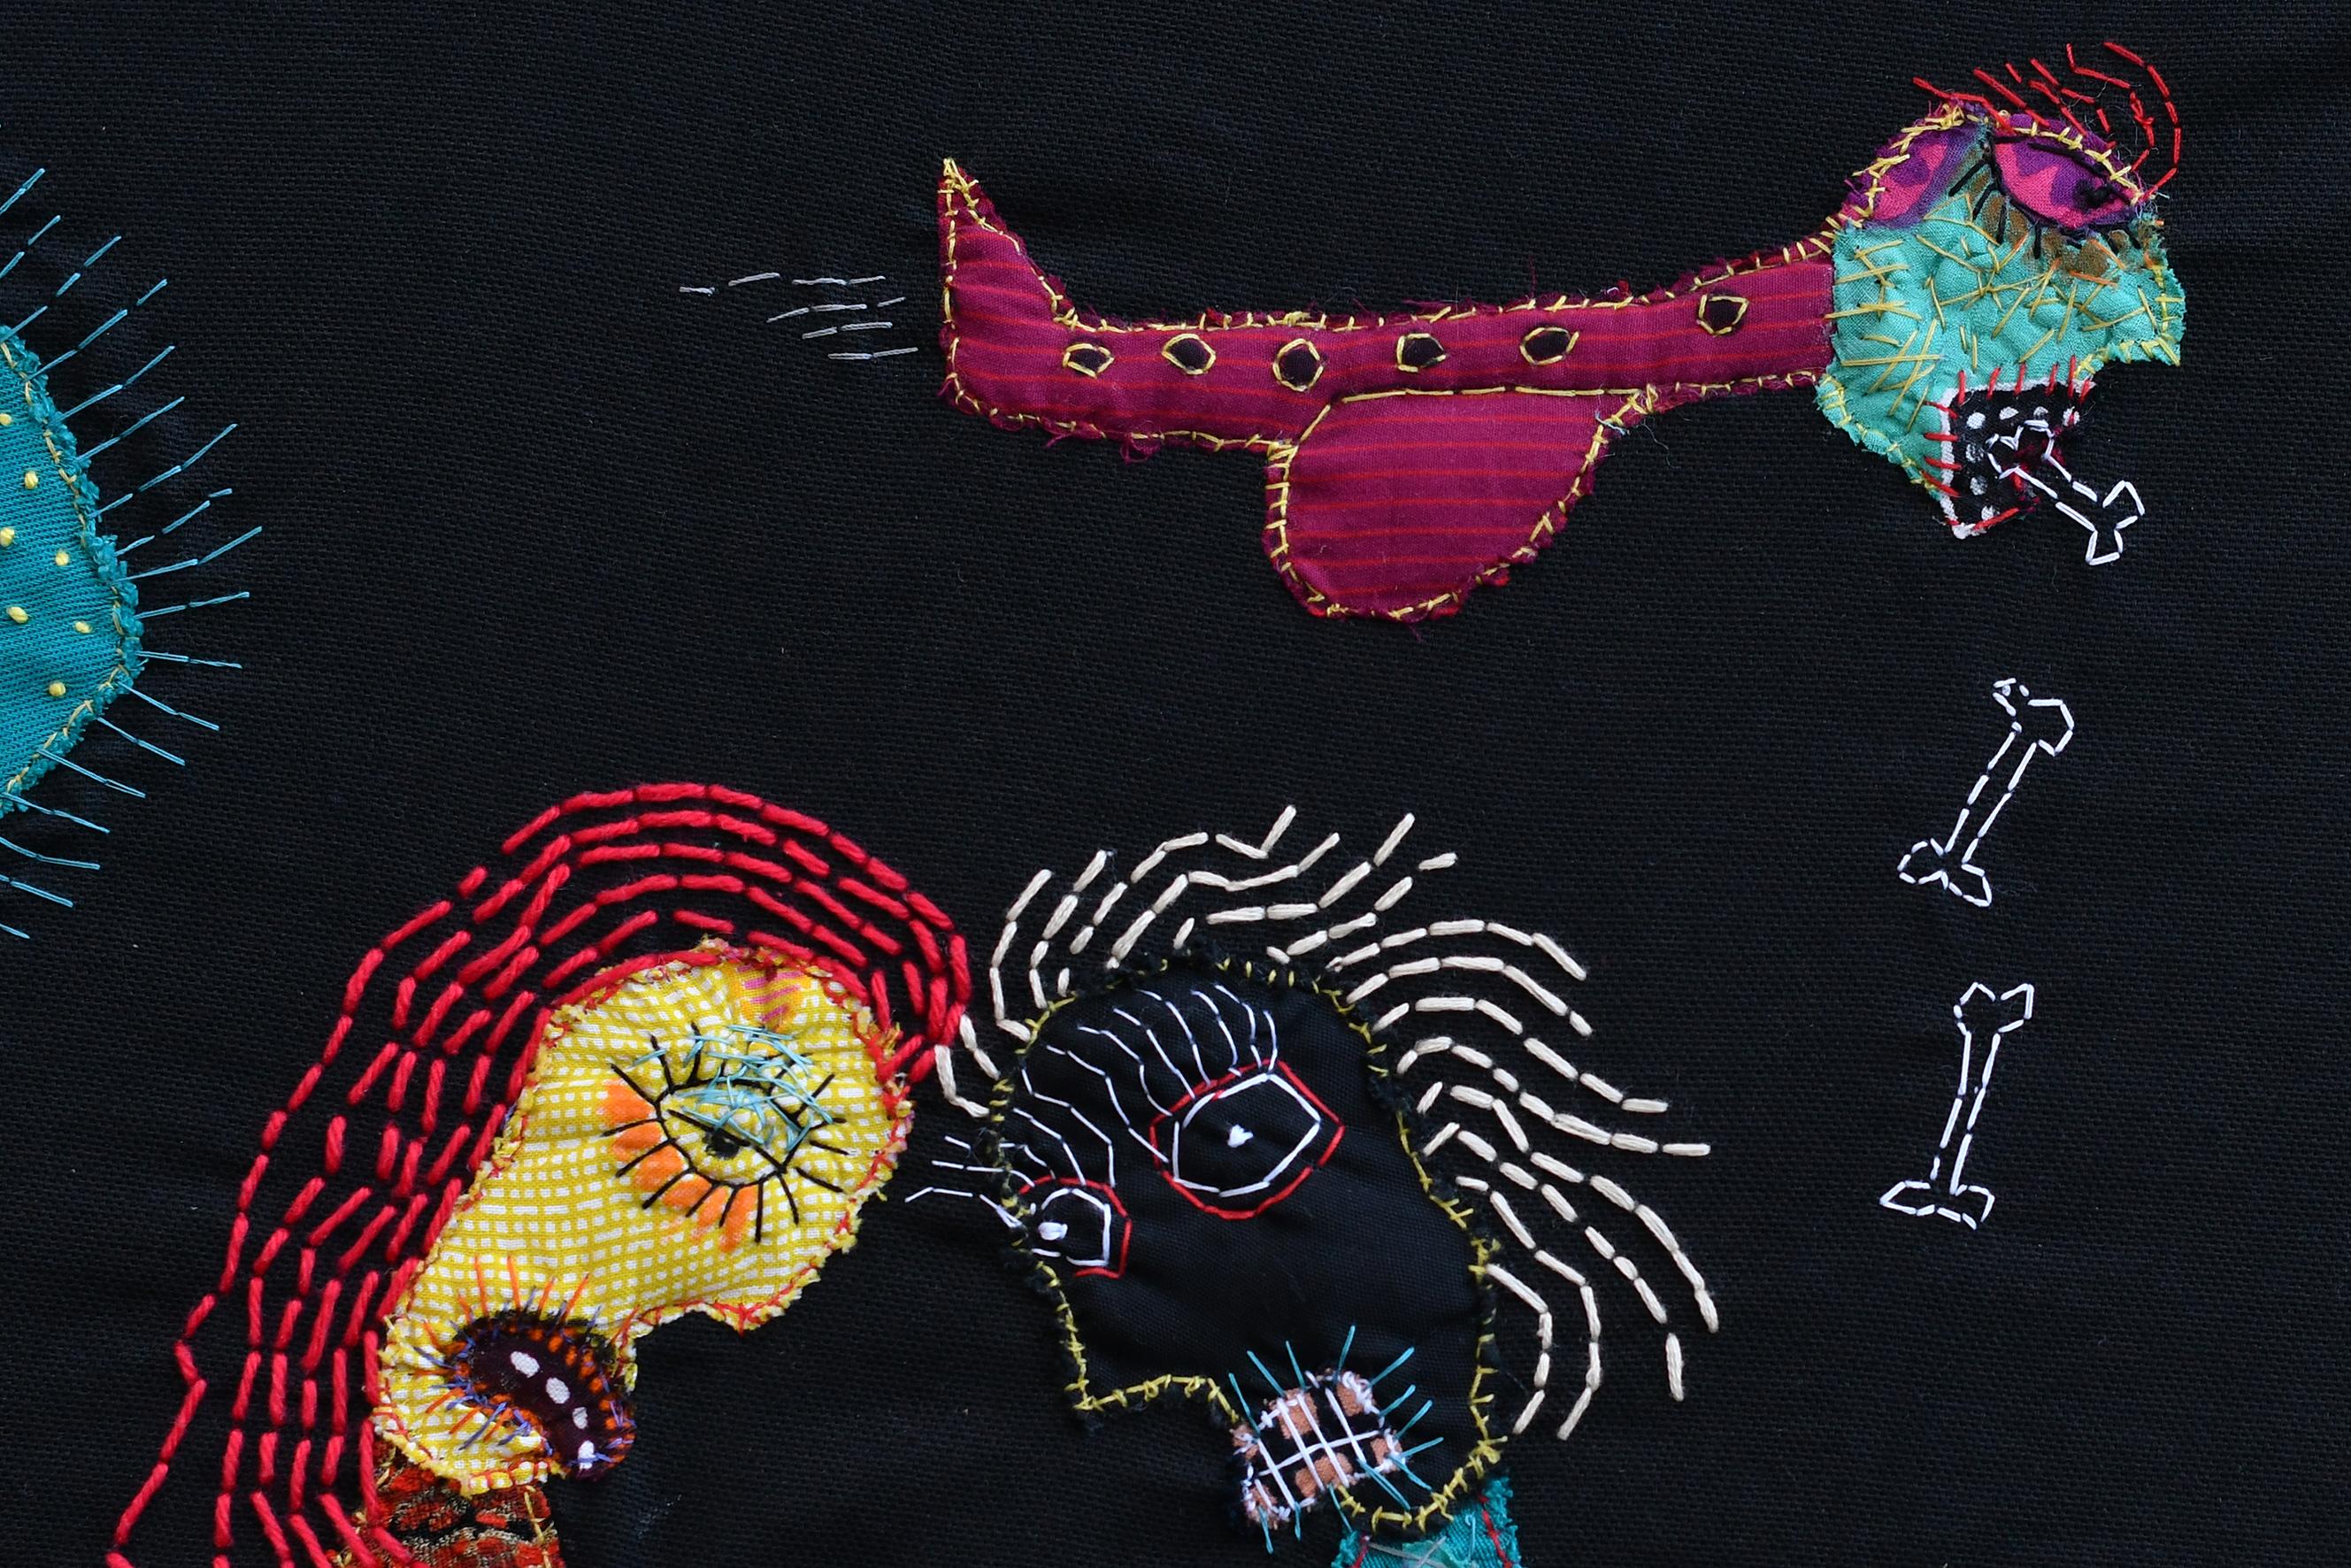 Embroidered textile painting
Unique work, hand-signed by the artist

Penelope or Parque of modern times, Barbara d’Antuono sews by hand like others recite mantras and decides nothing in advance. She lets images arise without any particular coherence